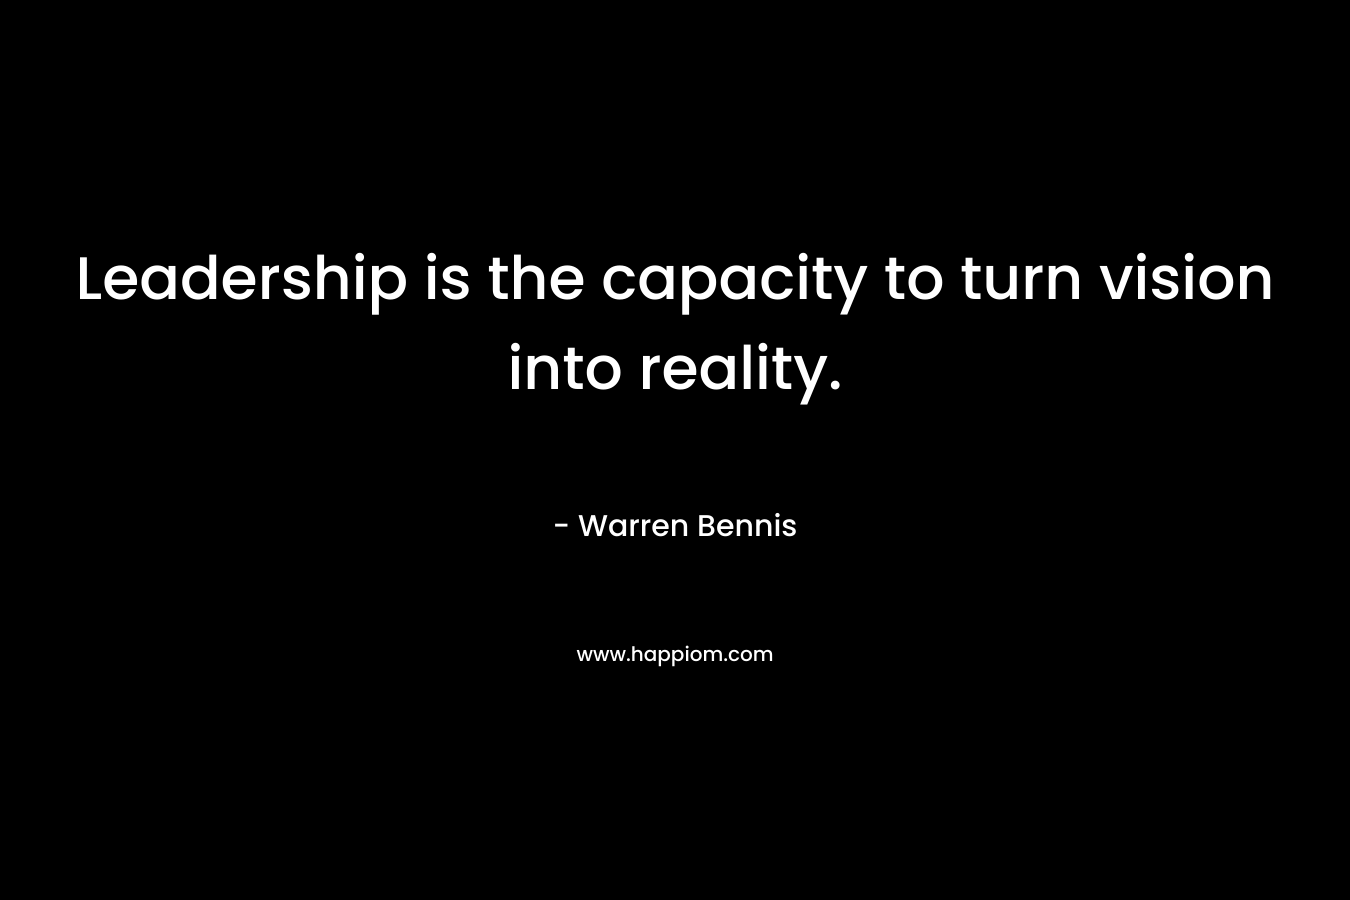 Leadership is the capacity to turn vision into reality.